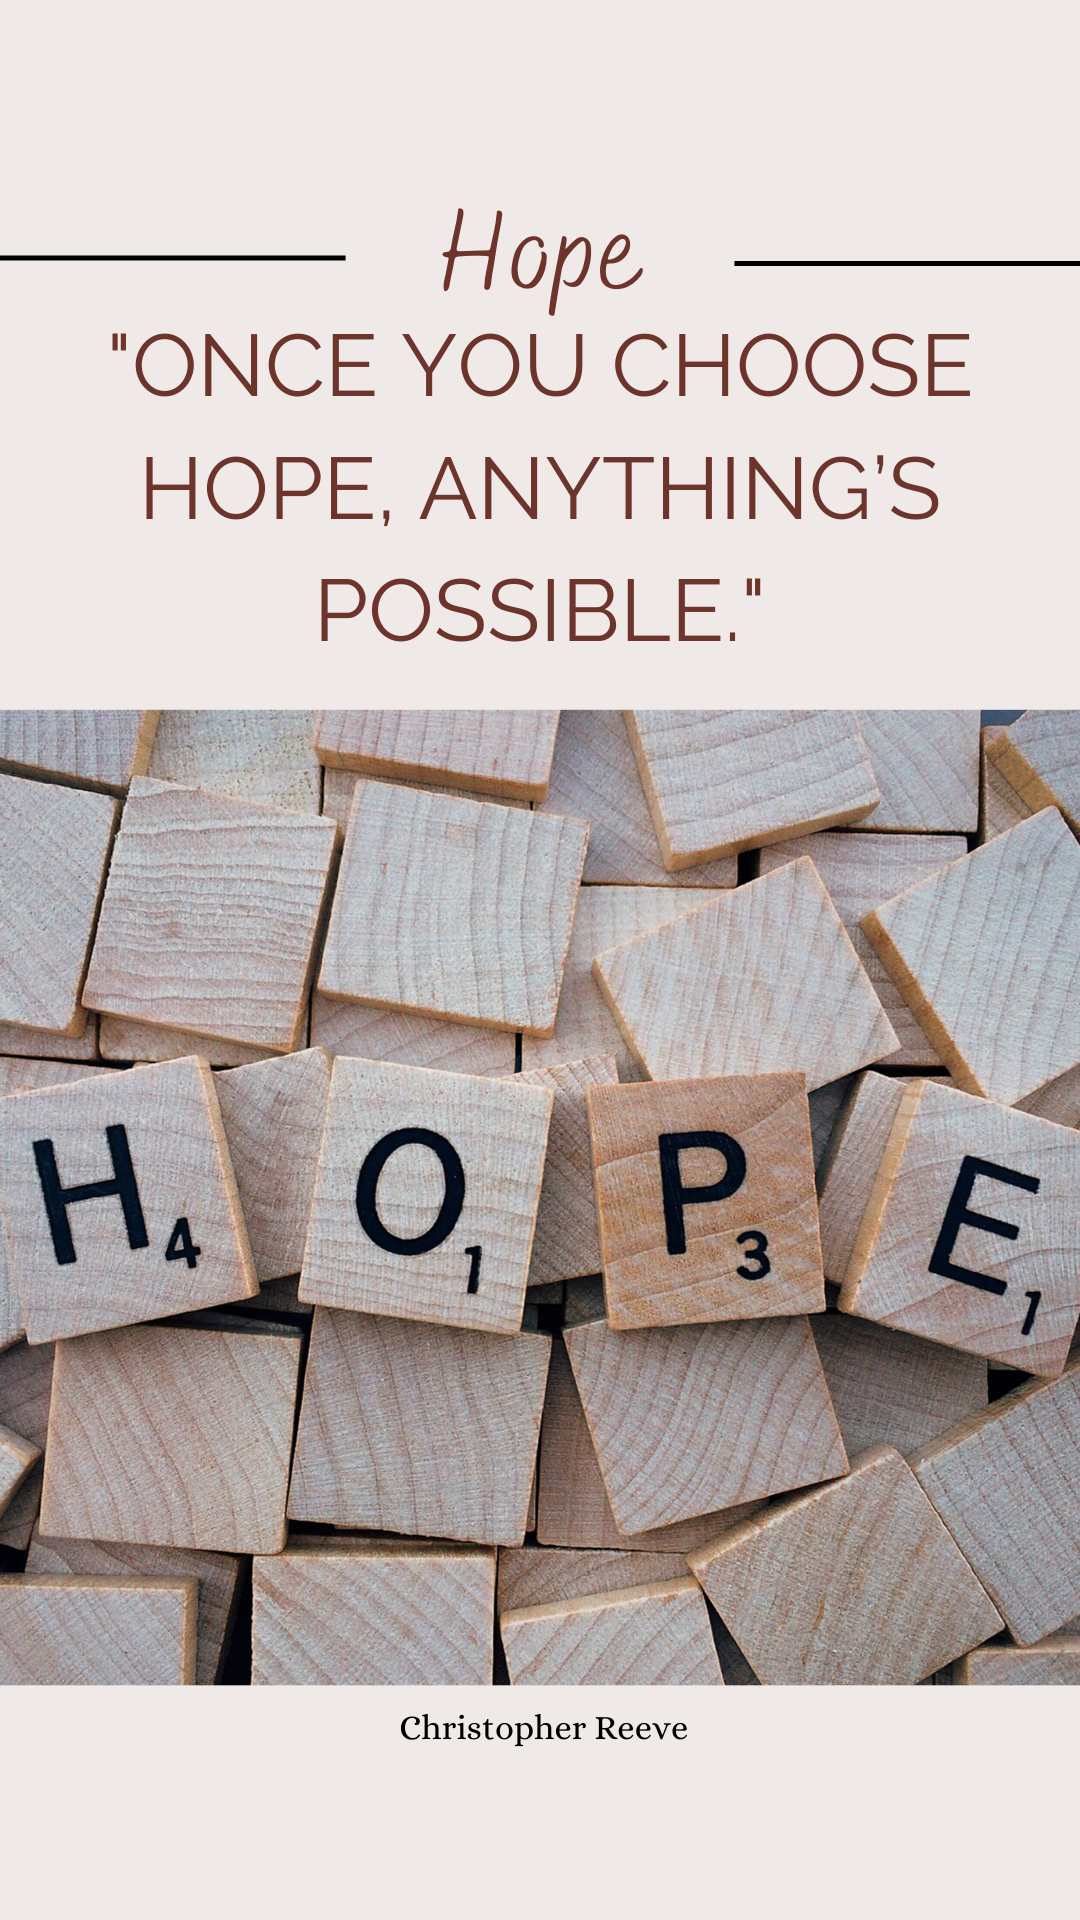 100 Quotes can inspire hope and provide encouragement in challenging times.